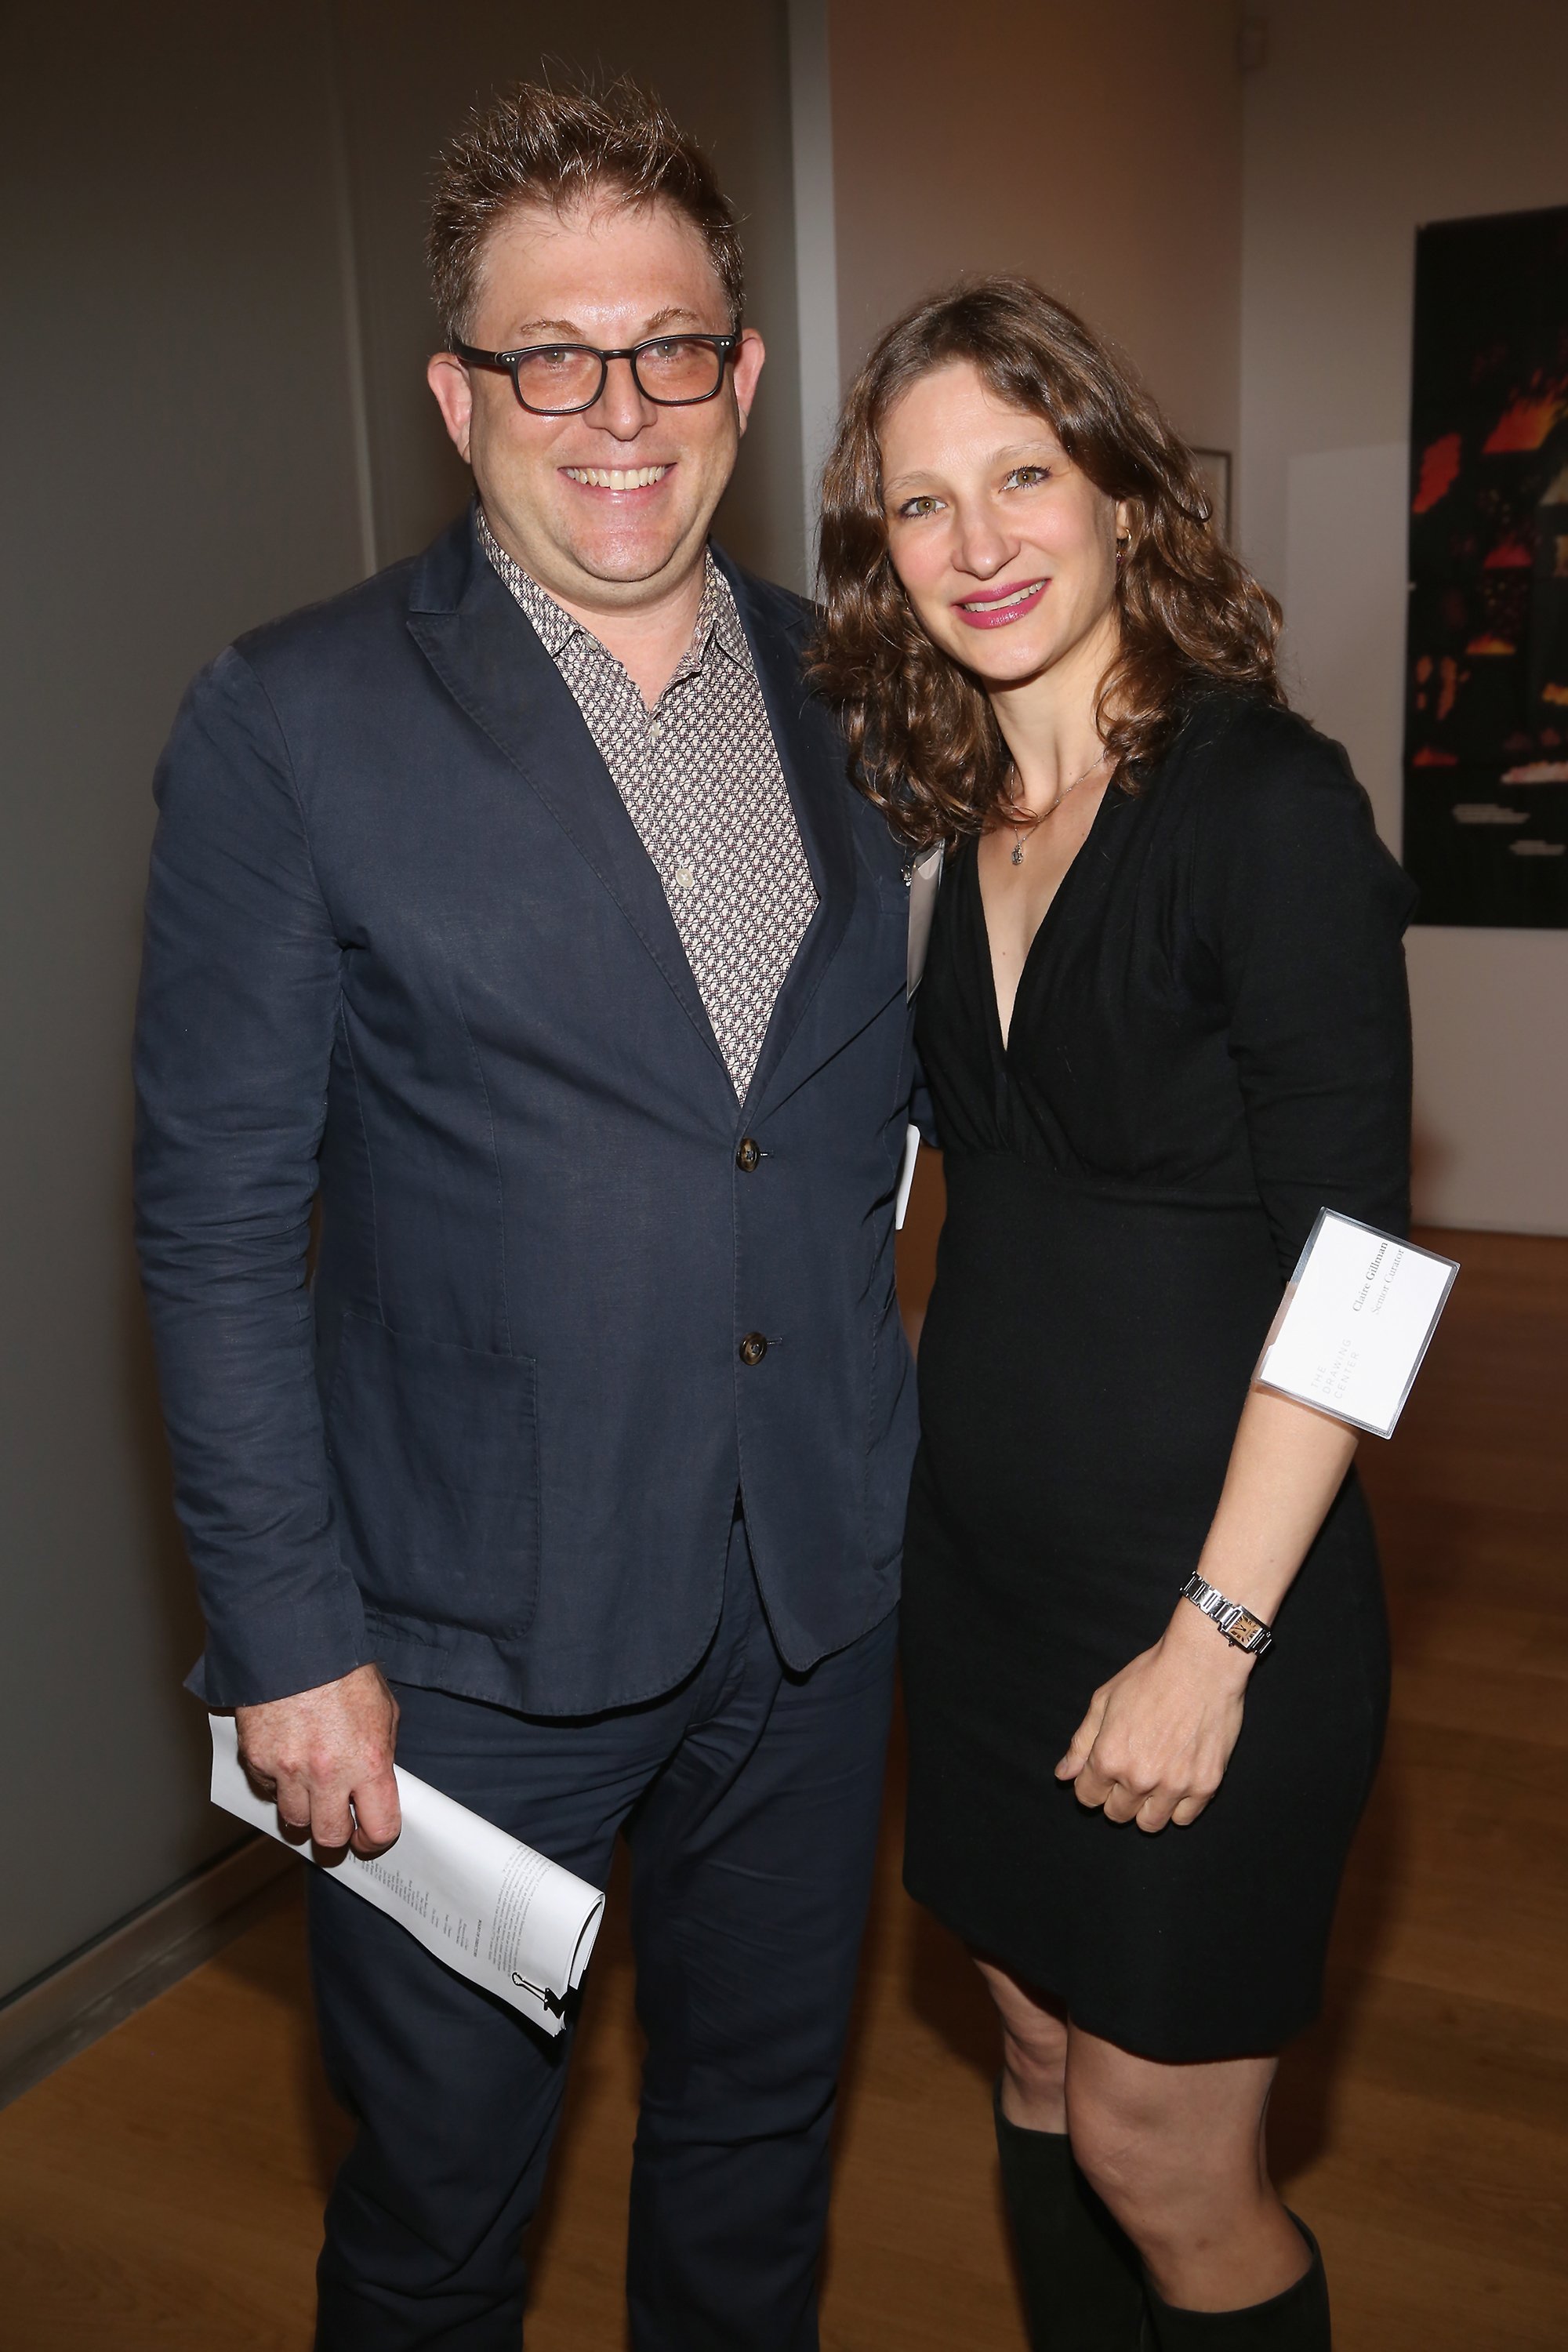 Brett Littman and Claire Gilman at the Drawing Center Annual Benefit Auction. Courtesy of photographer Sylvain Gaboury, © Patrick McMullan.